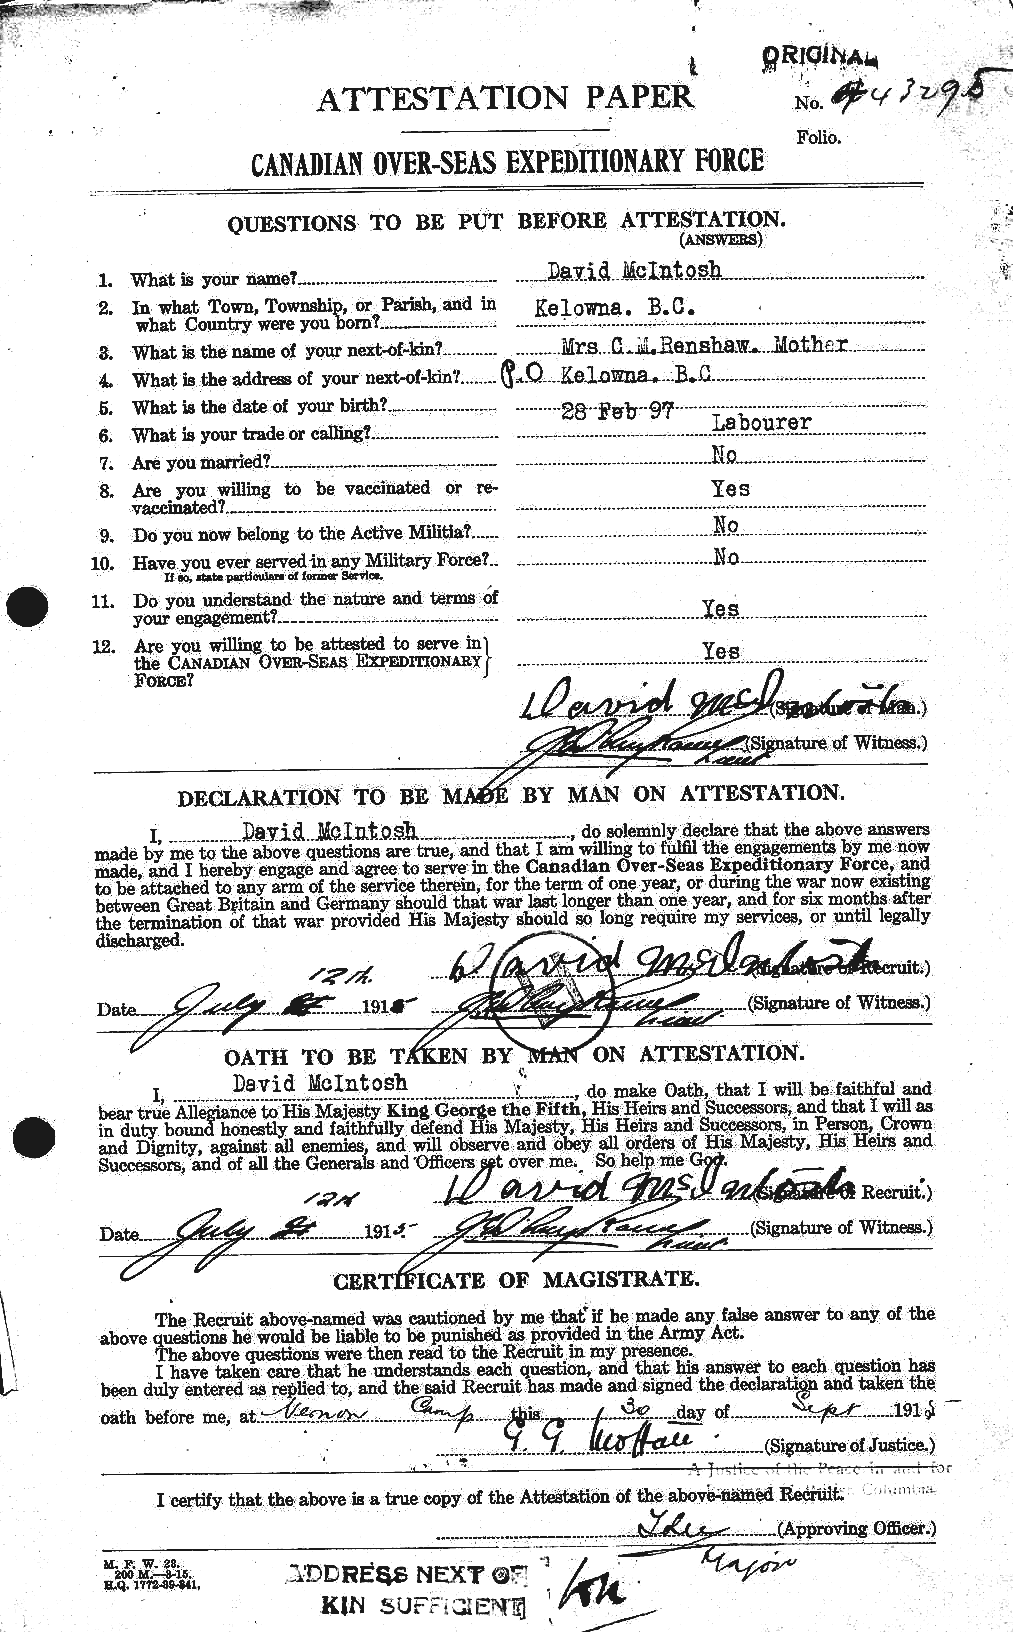 Personnel Records of the First World War - CEF 525629a